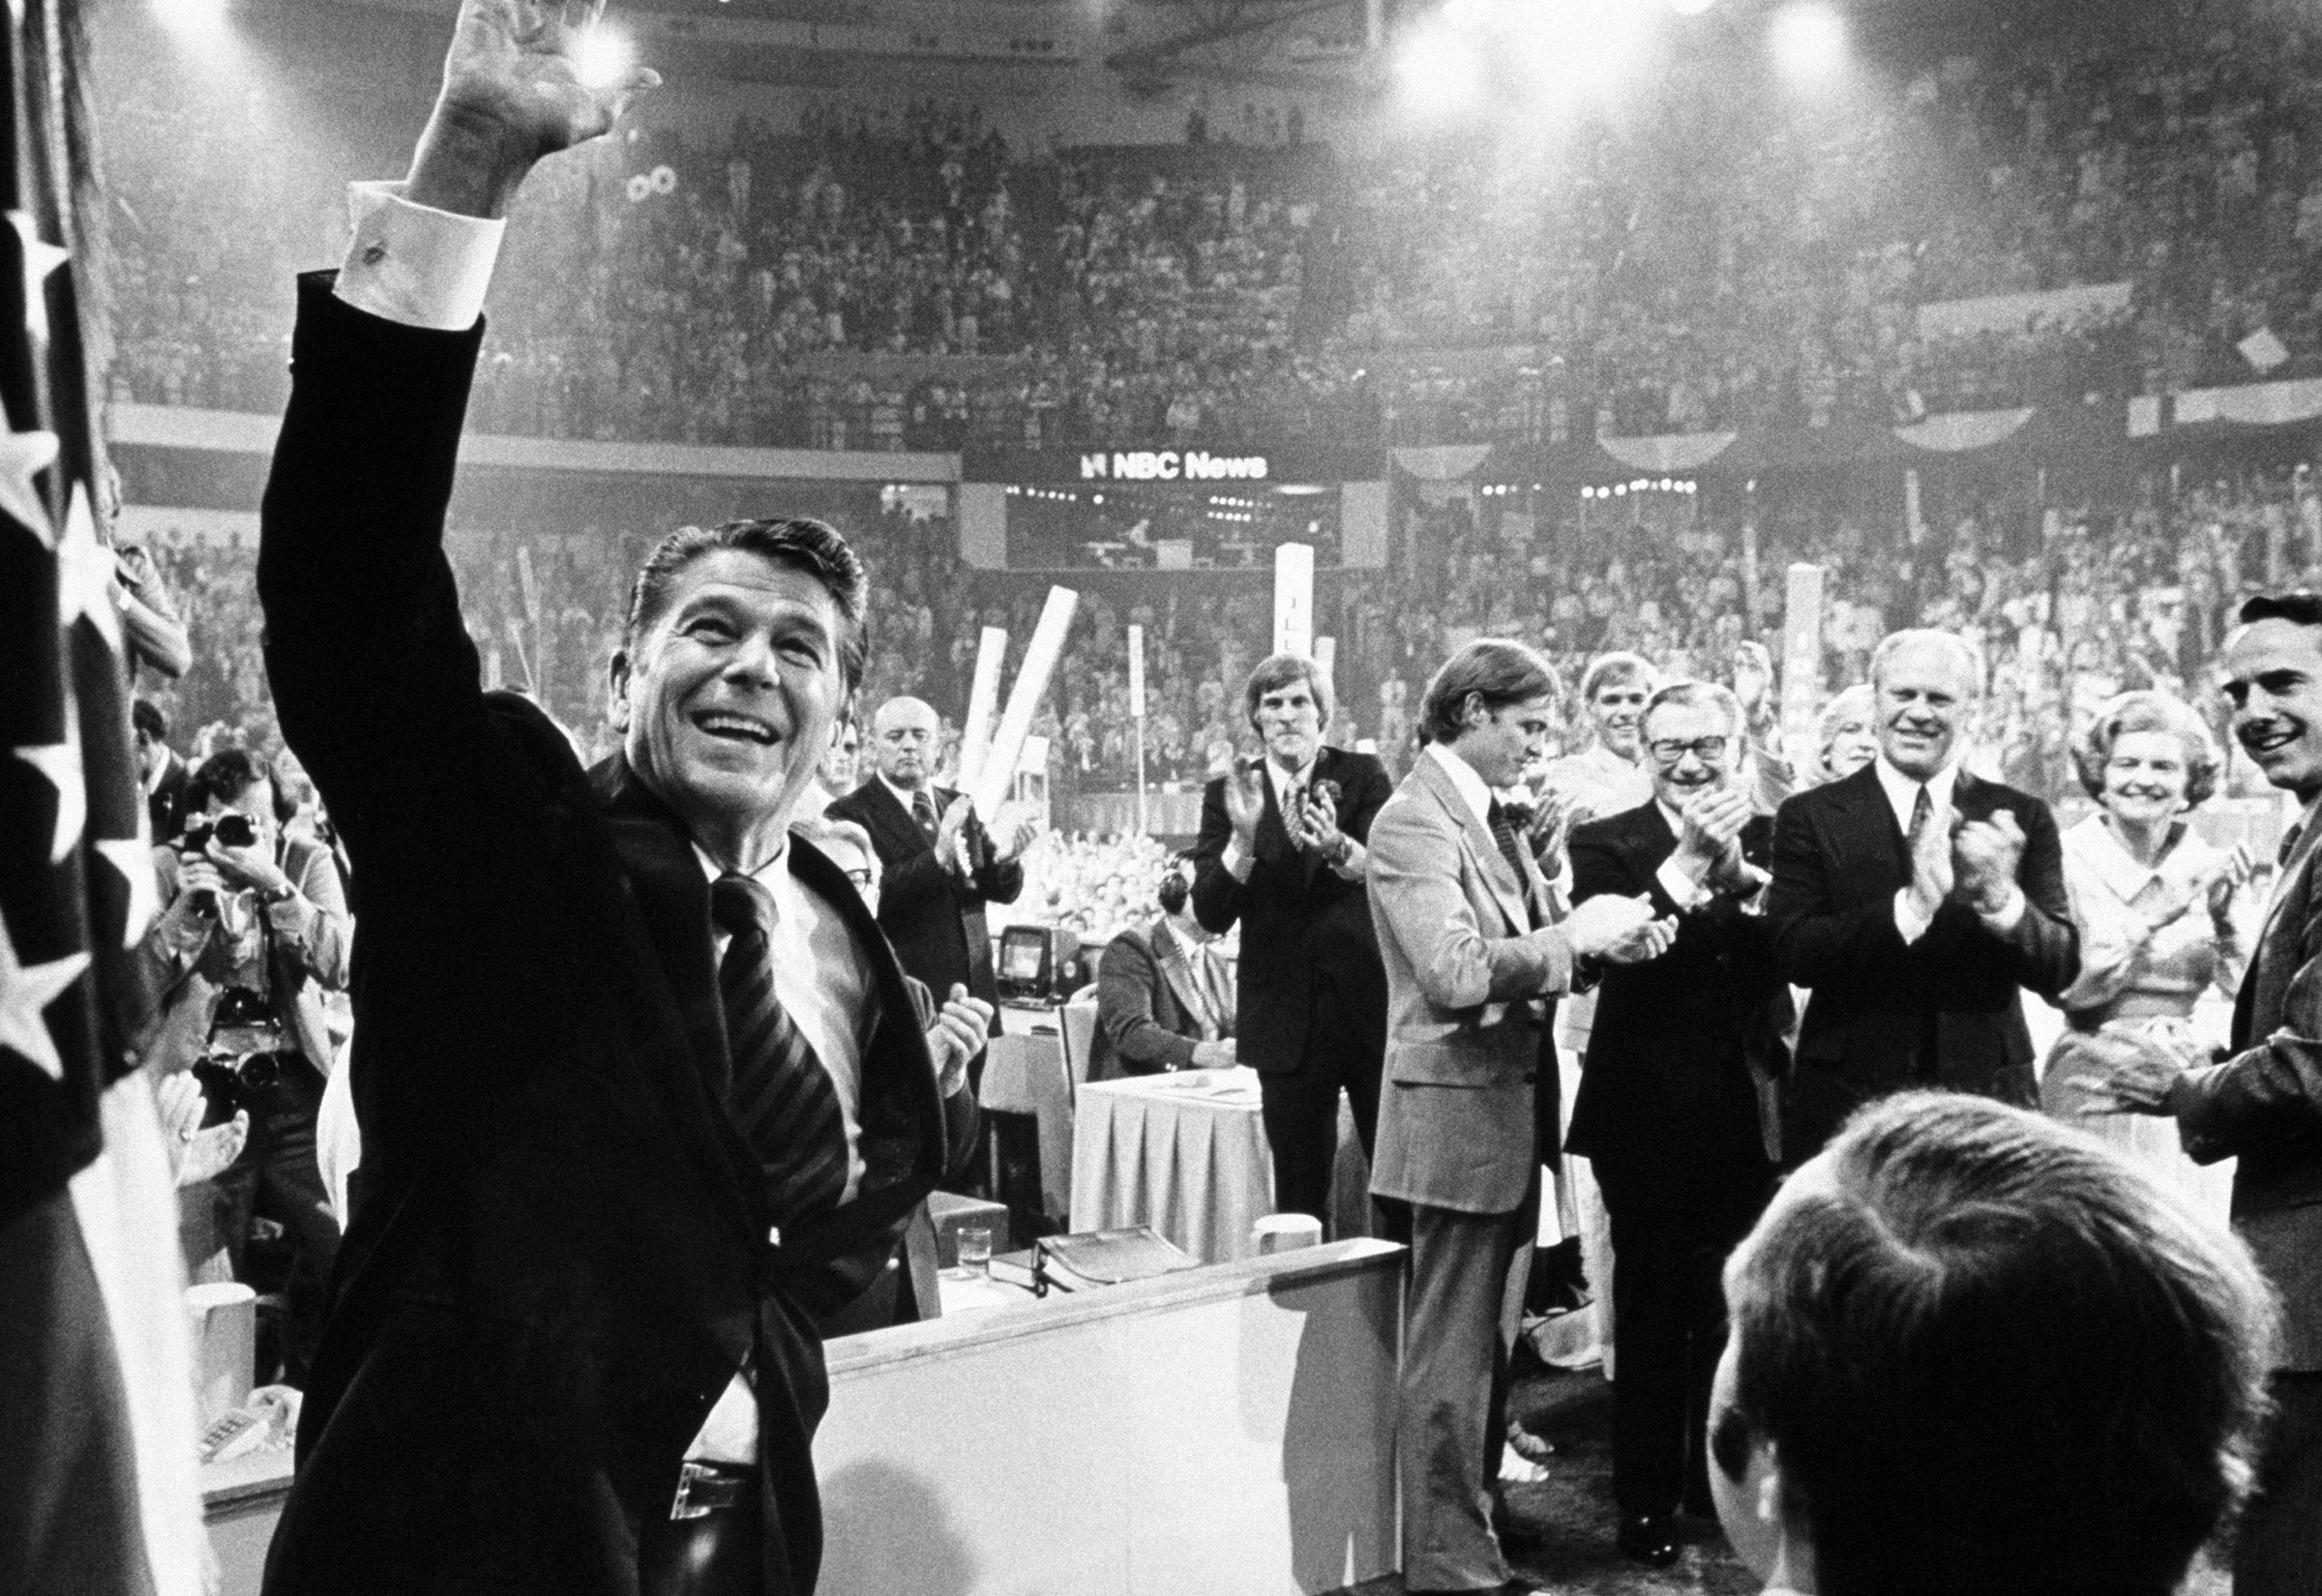 Ronald Reagan waves to the crowd on the final night of the Republican National Convention in Kansas City on Aug. 19, 1976. (David Hume Kennerly—Getty Images)